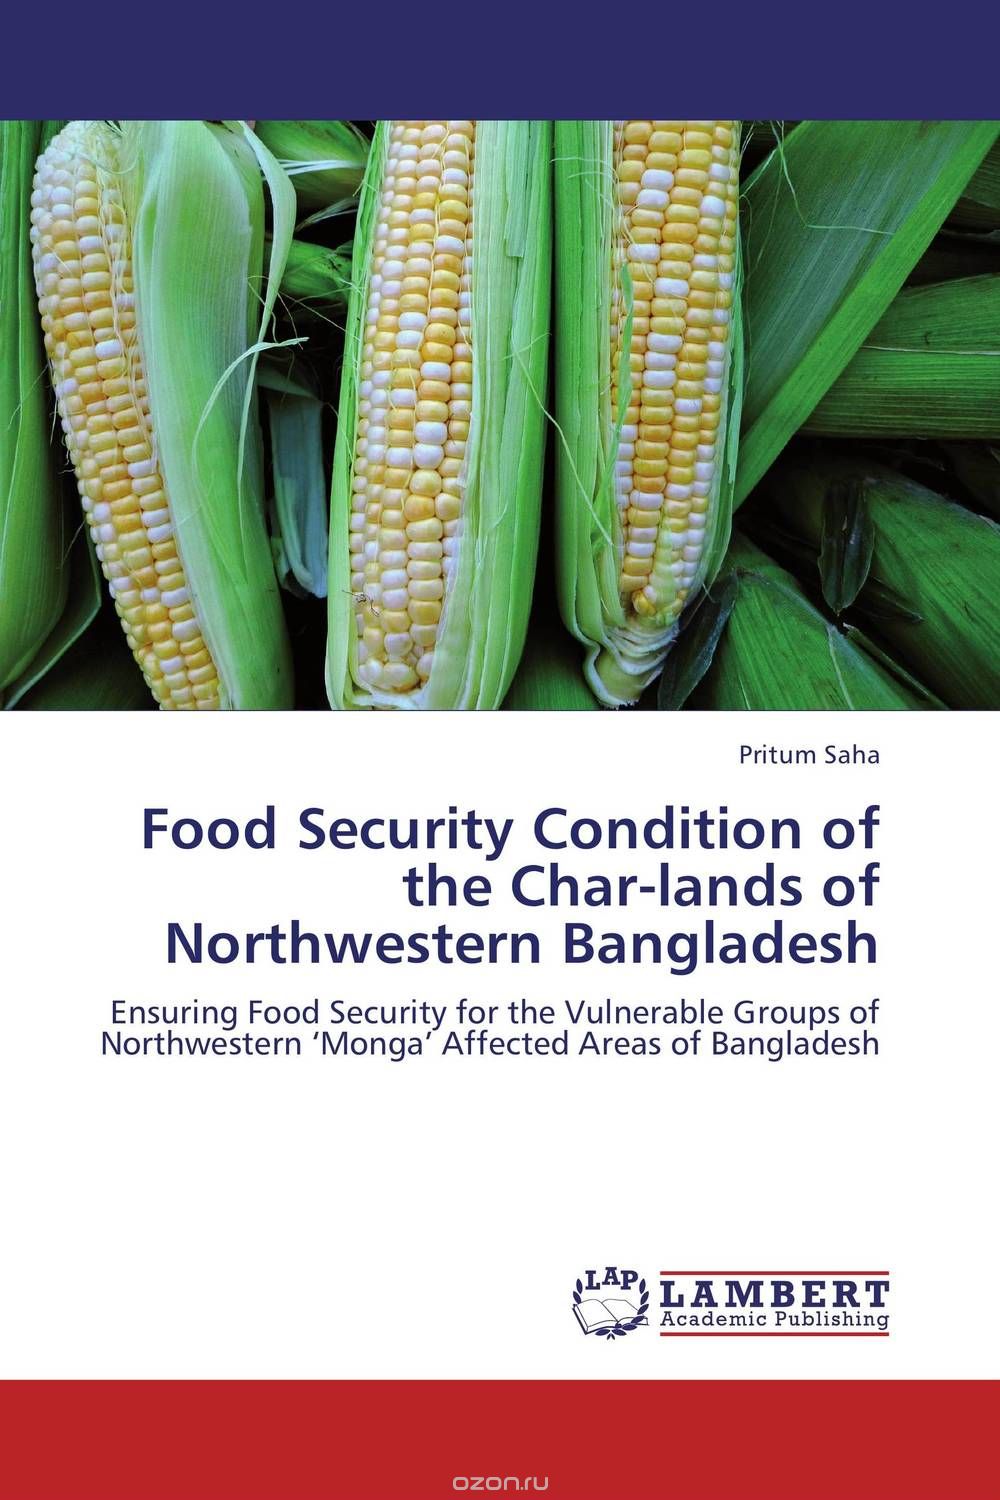 Food Security Condition of the Char-lands of Northwestern Bangladesh